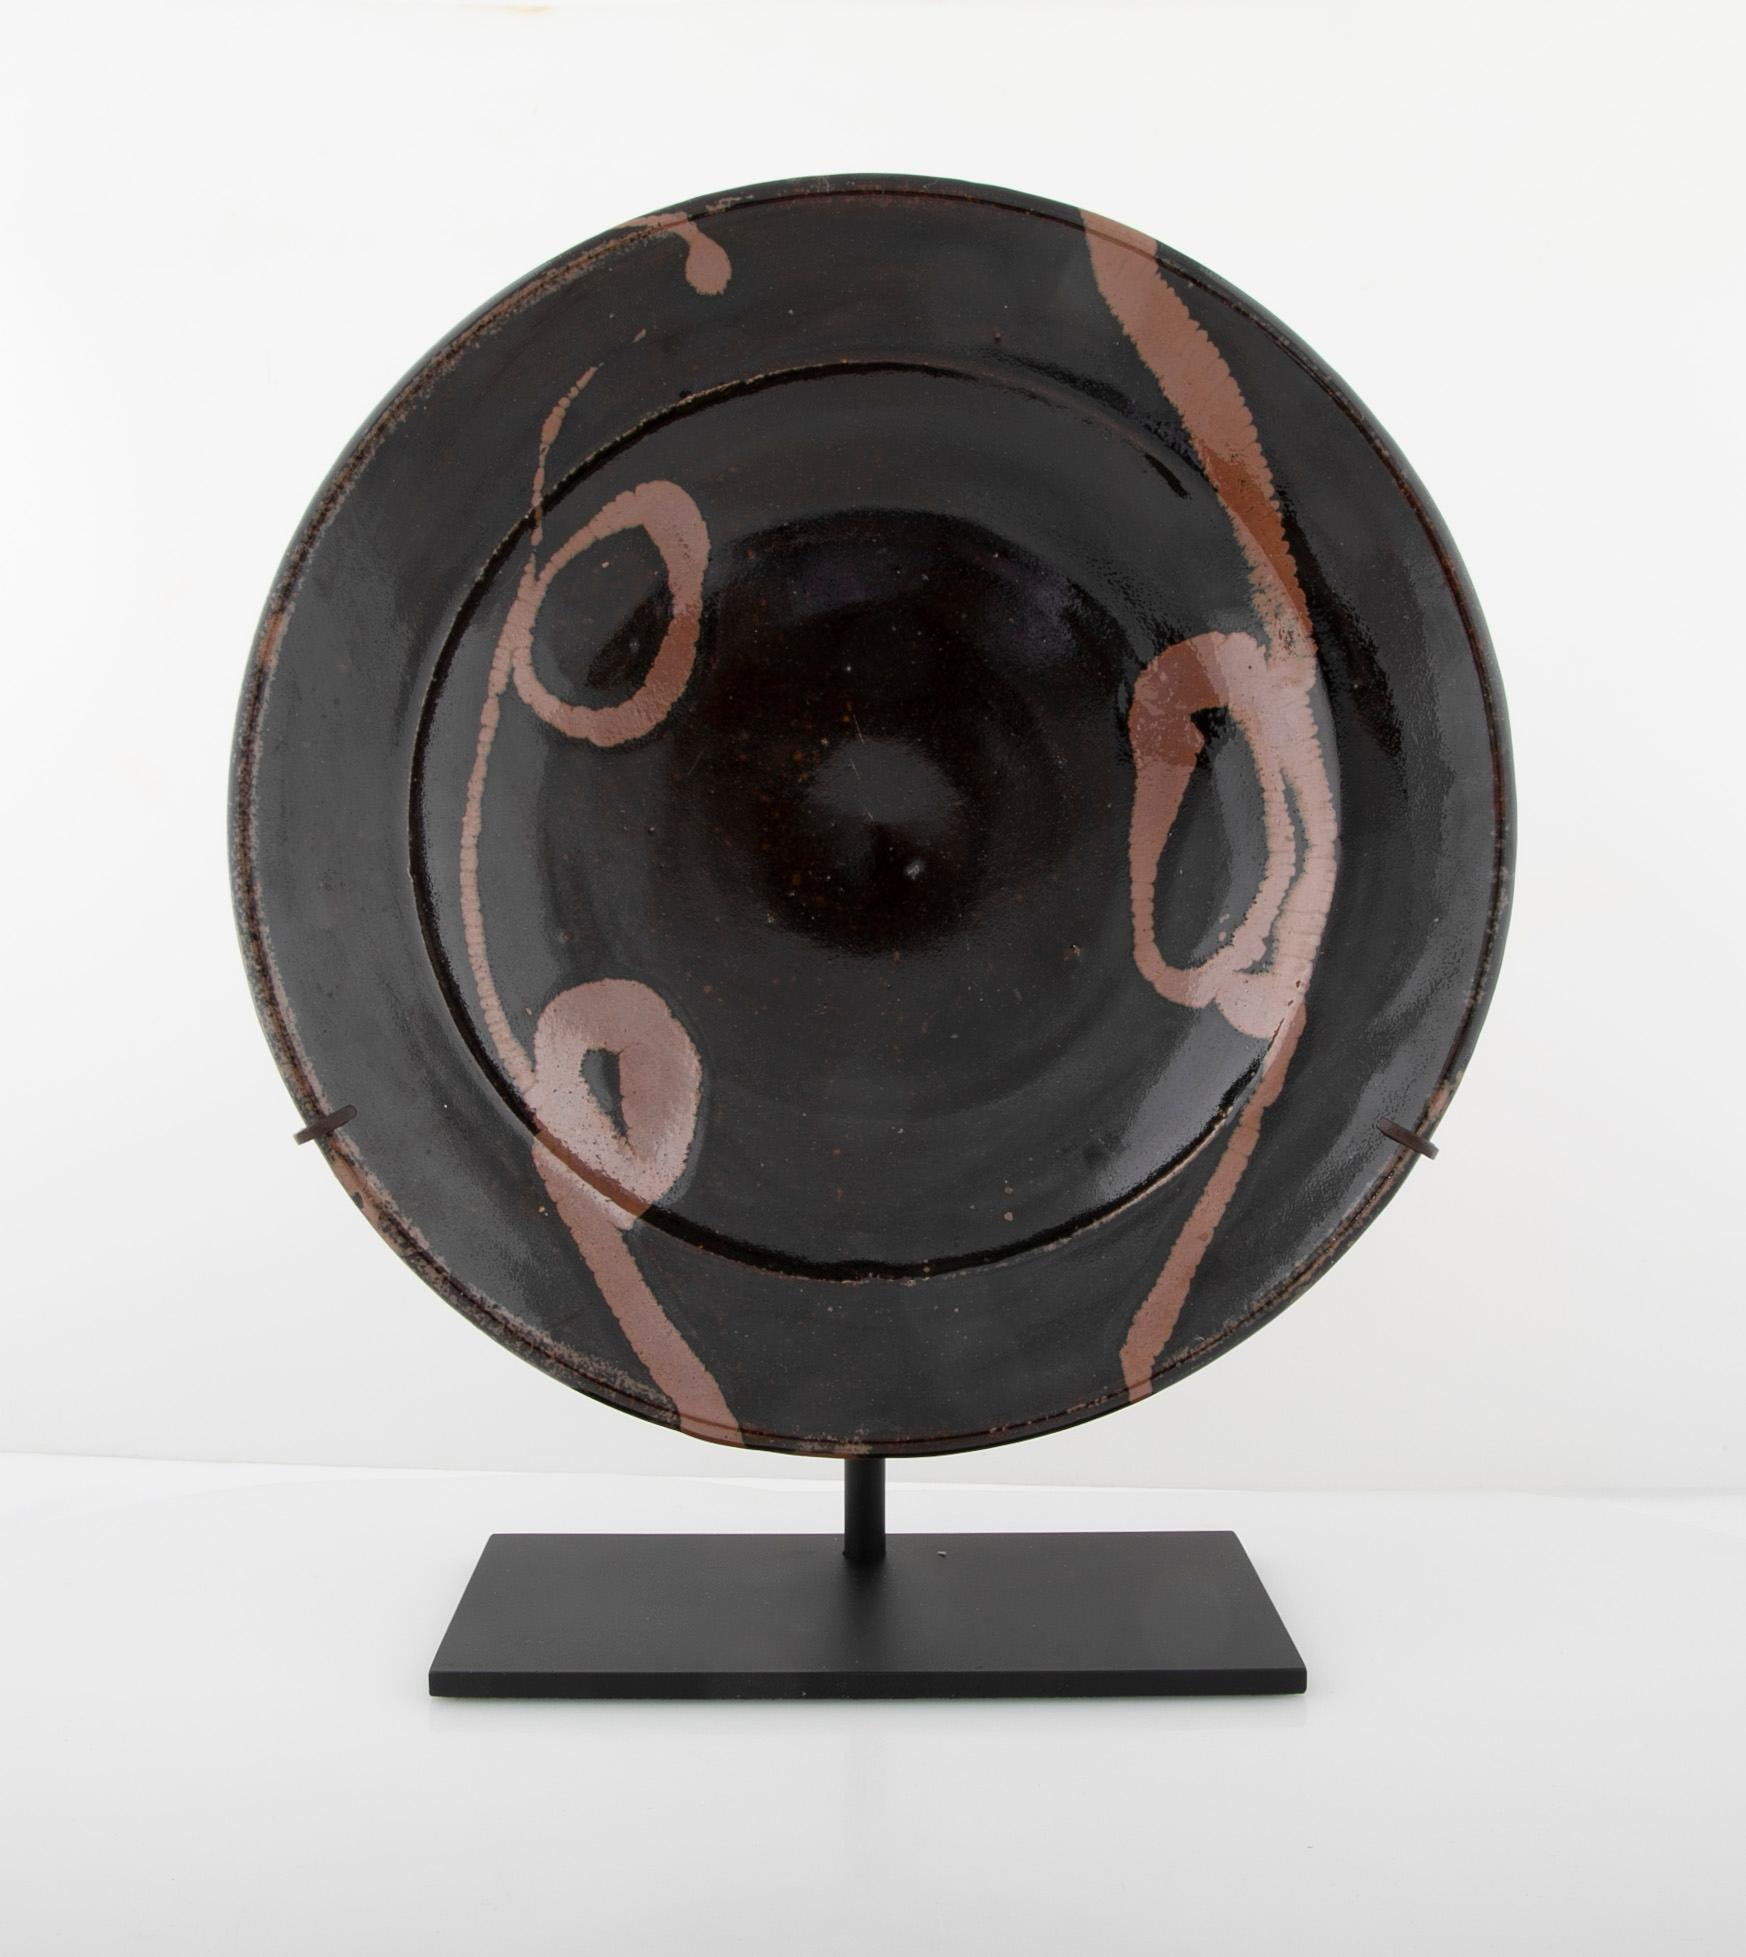 Shoji Hamada Japanese clay charger with black glaze and terracotta toned glazed decoration, circa 1960s. On contemporary stand. The piece is unsigned and as such cannot definitively said to be by Shoji Hamada. This is not uncommon for his